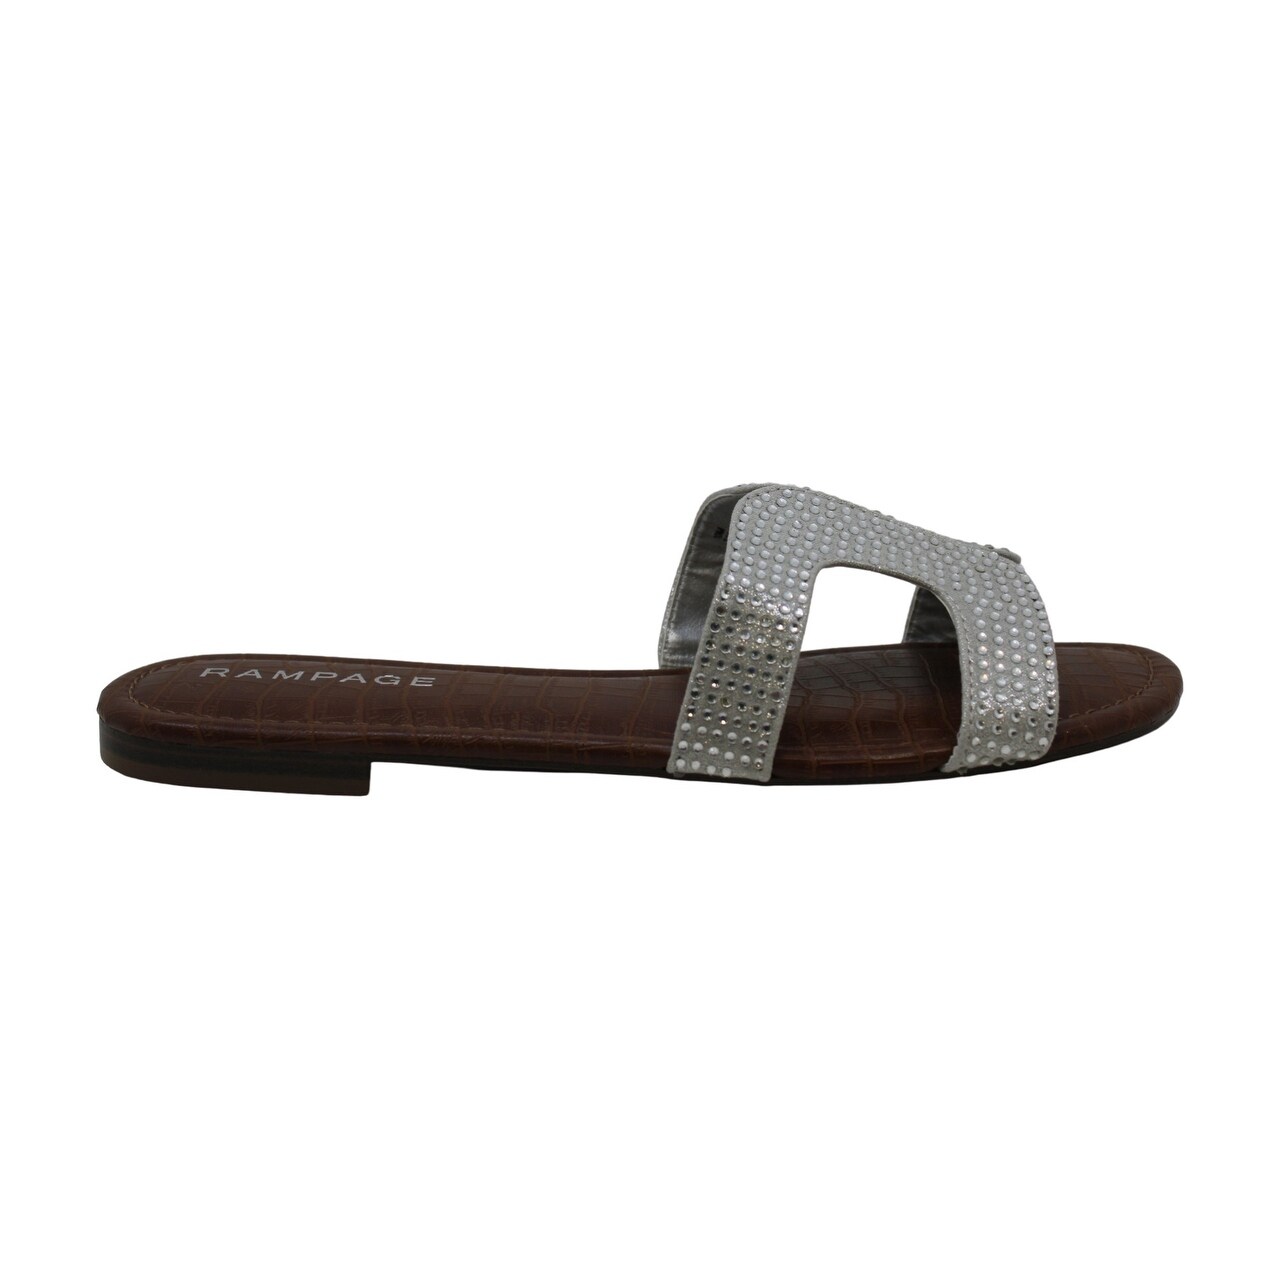 h band sandals